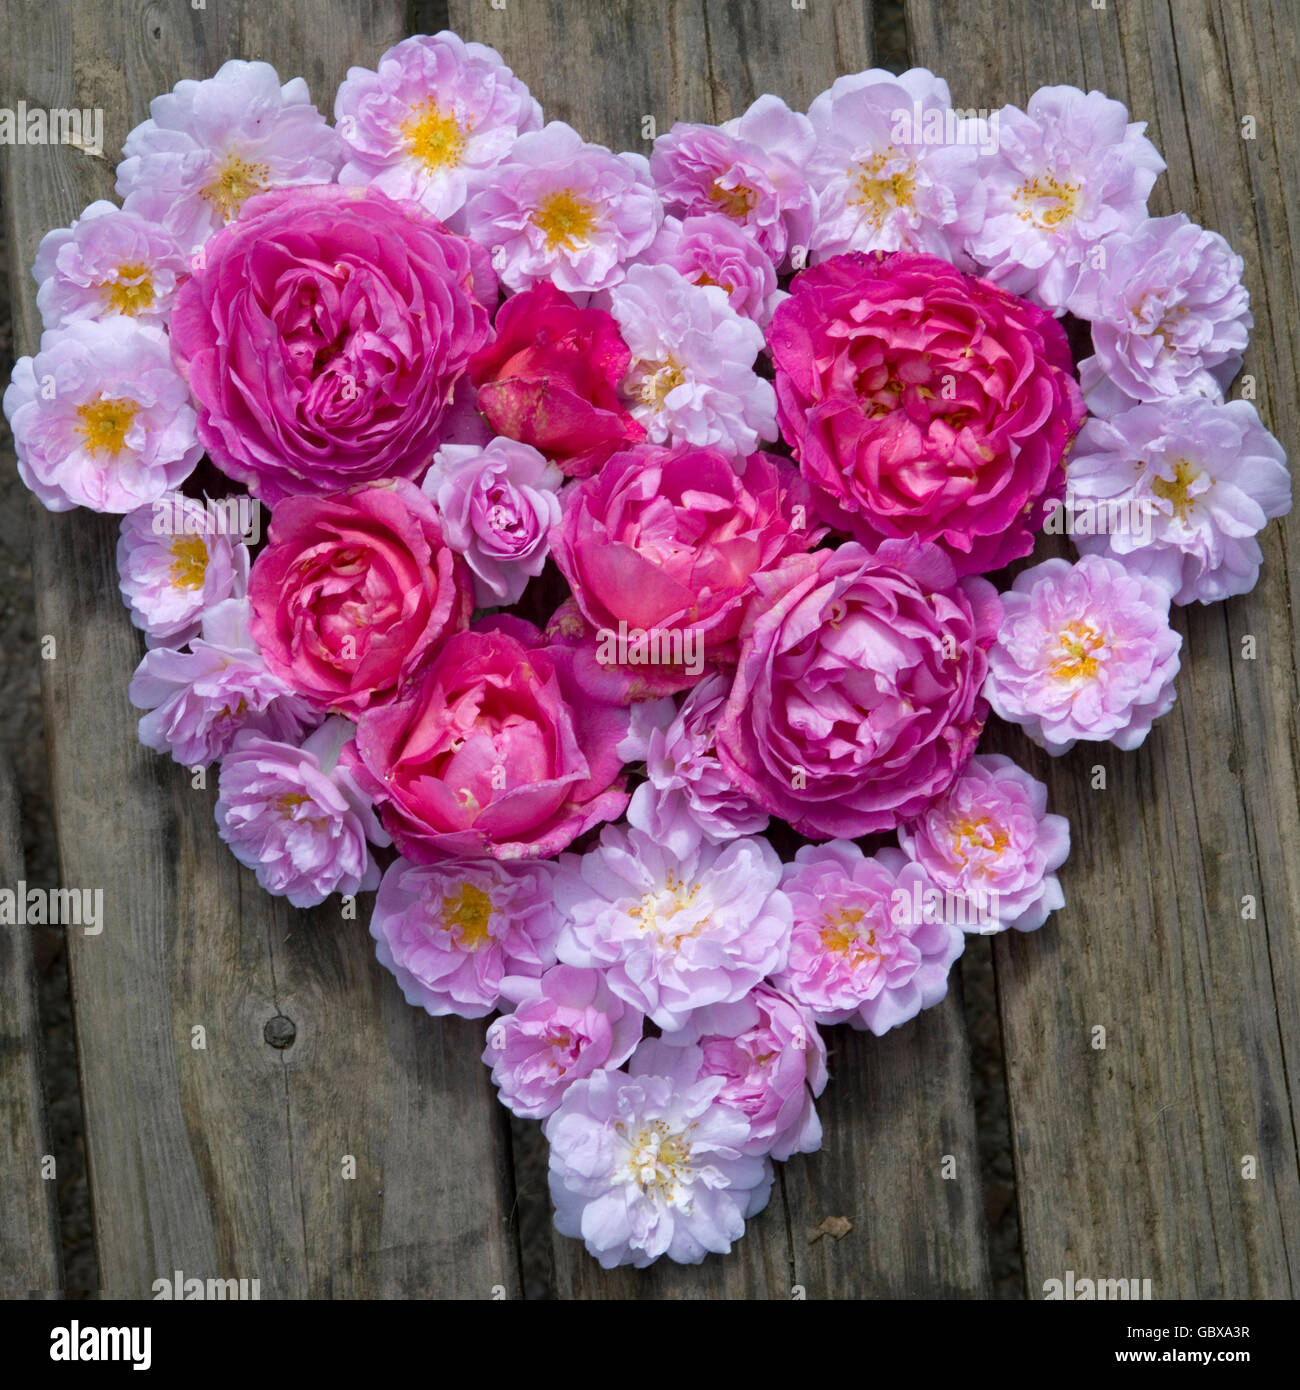 heart of flowers with pink roses in the middle Stock Photo